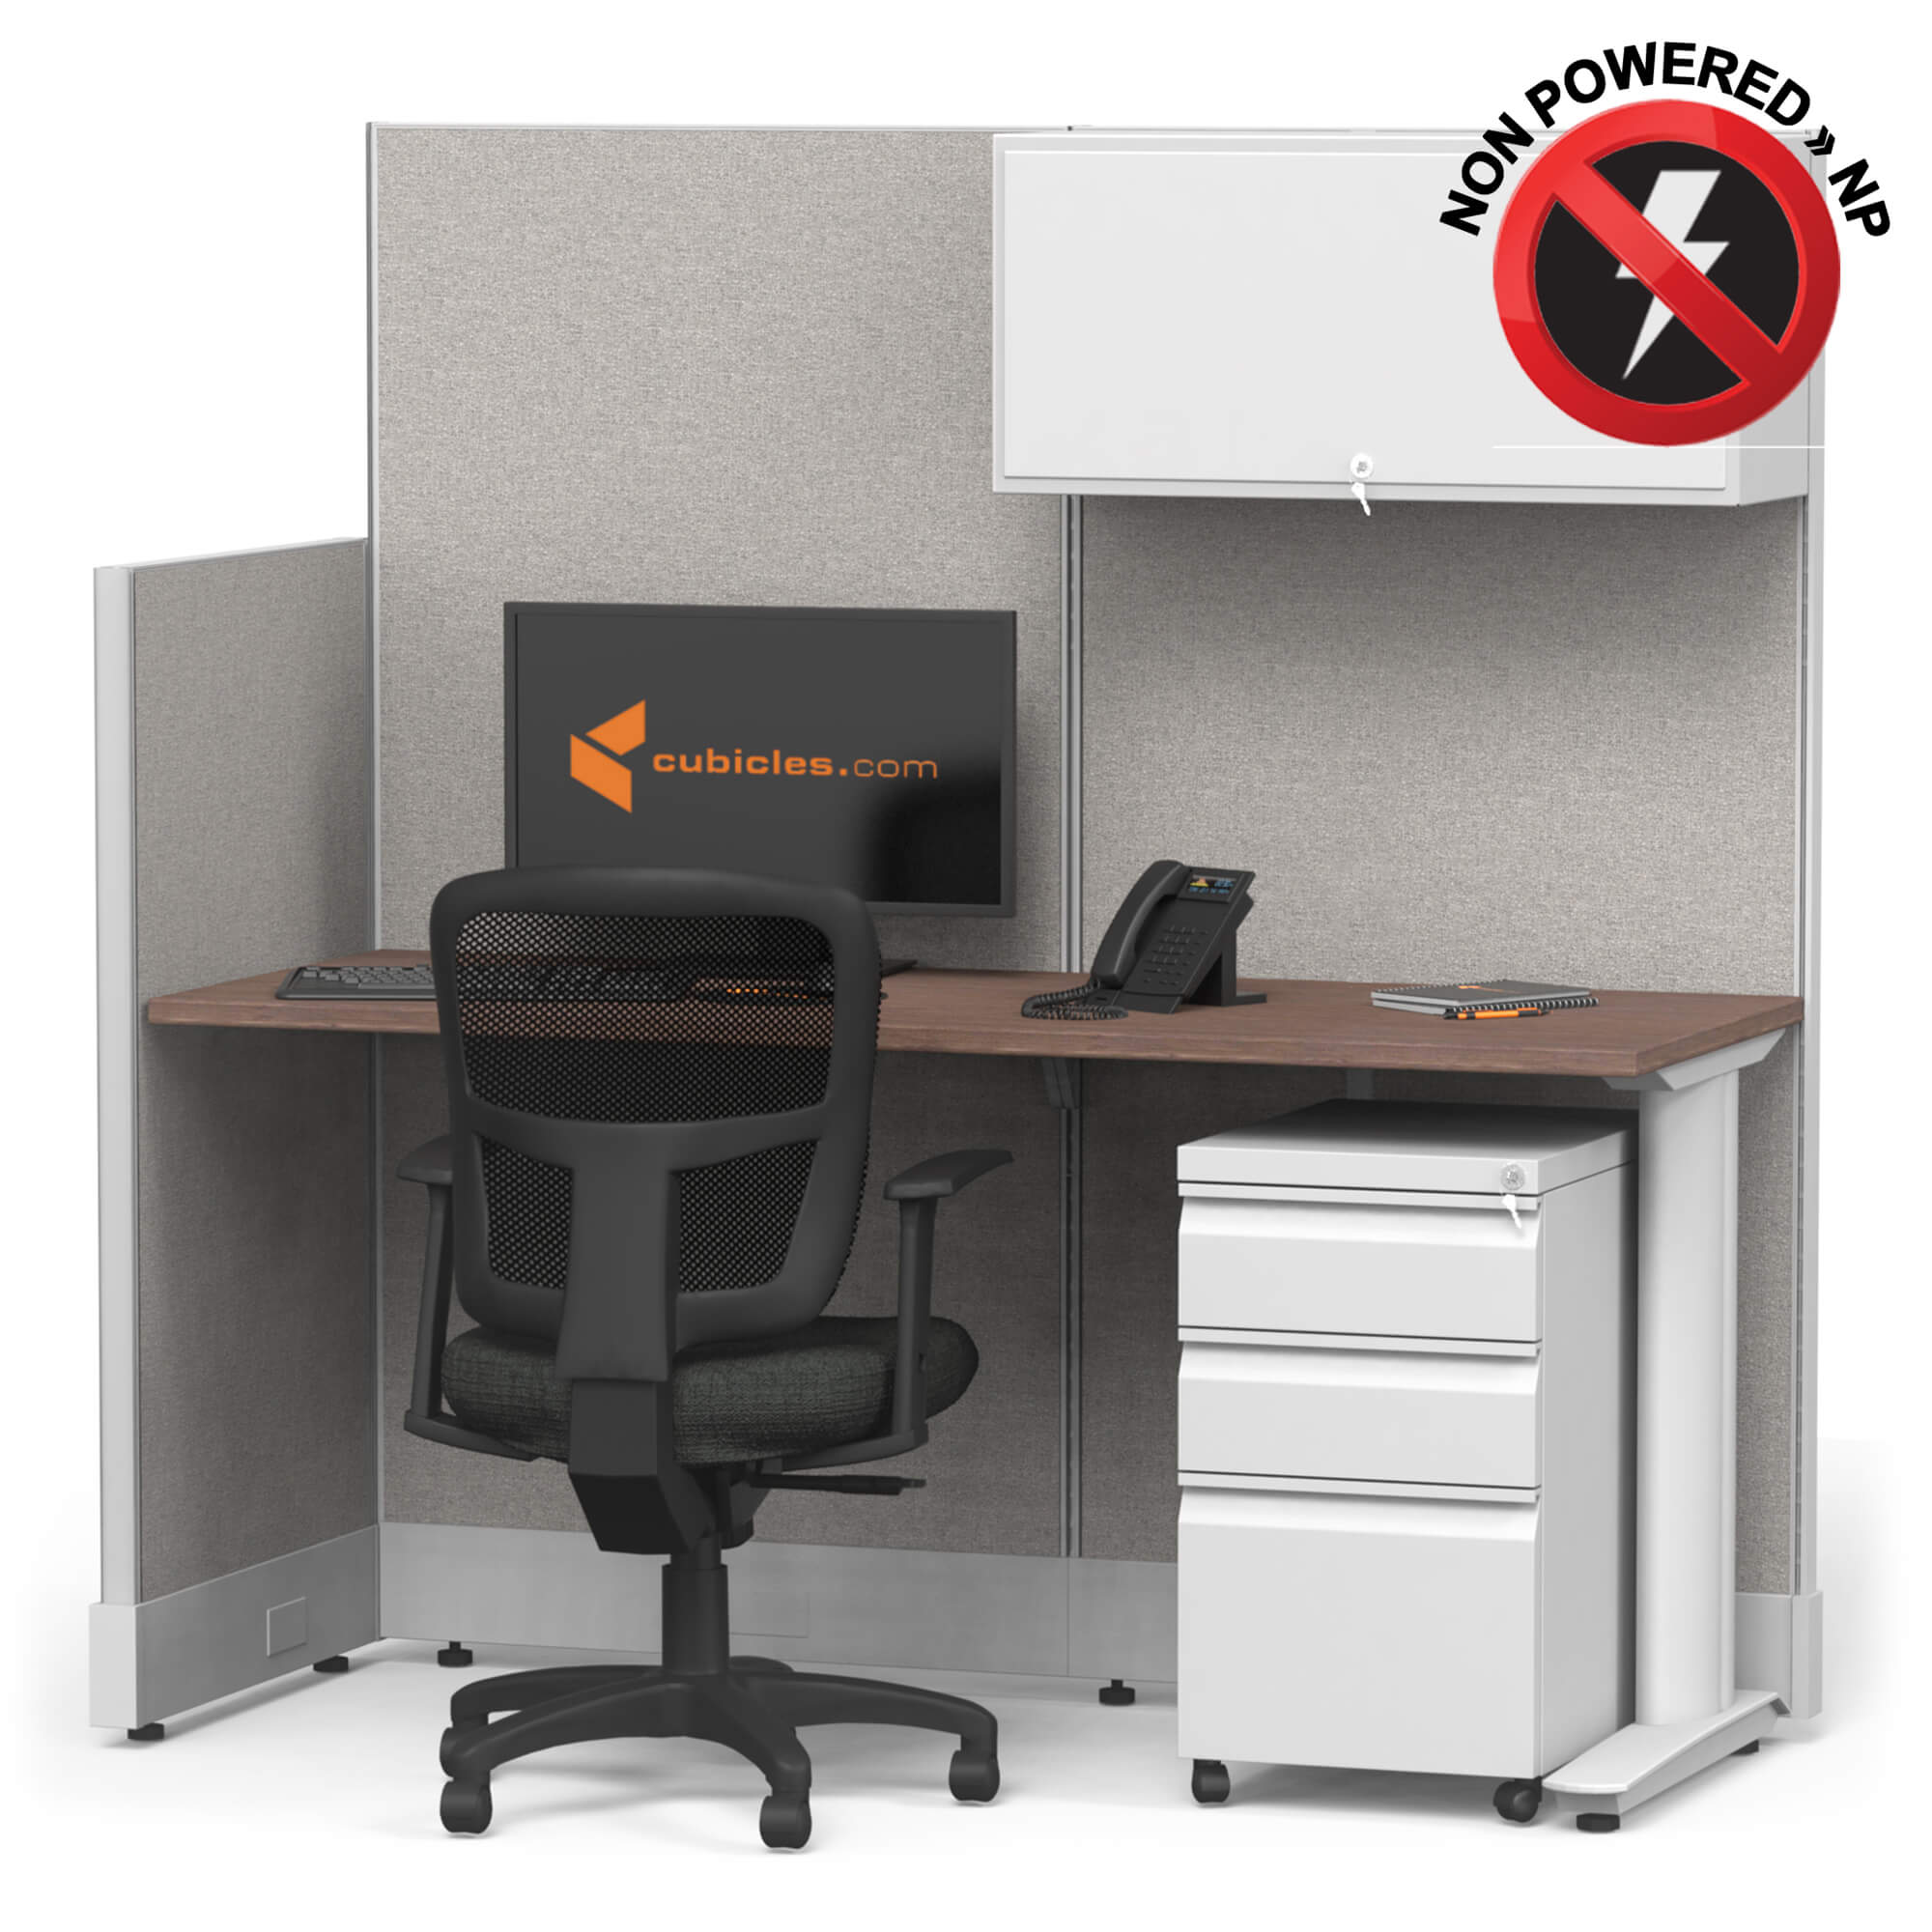 cubicle-desks-straight-with-storage-1pack-non-powered-sign.jpg